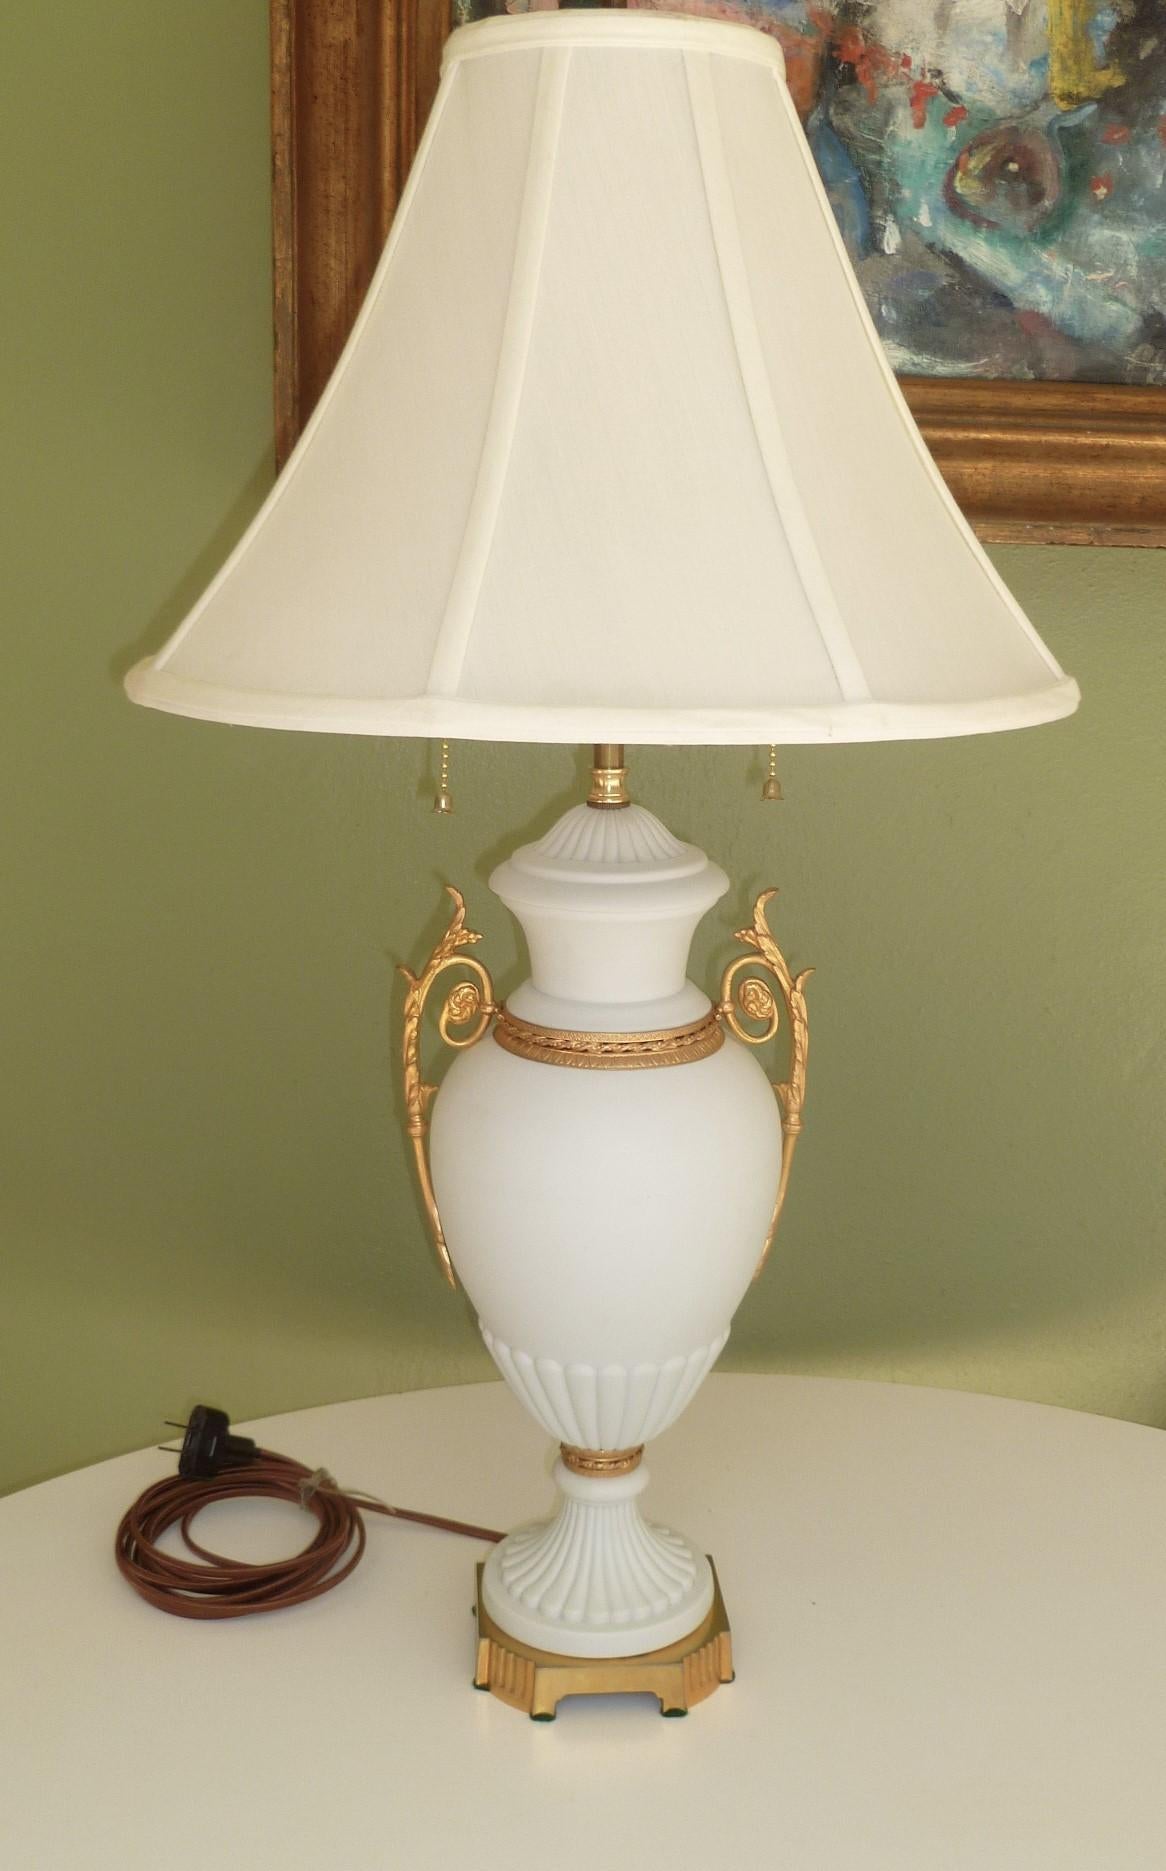 REDUCED FROM $950....A Bisque Parian porcelain classical urn with finely chased gilt bronze ormolu handles, base and mounts, finished as a double socket table lamp. The matte finish of the porcelain is exquisite. Stamped made in France on the inner